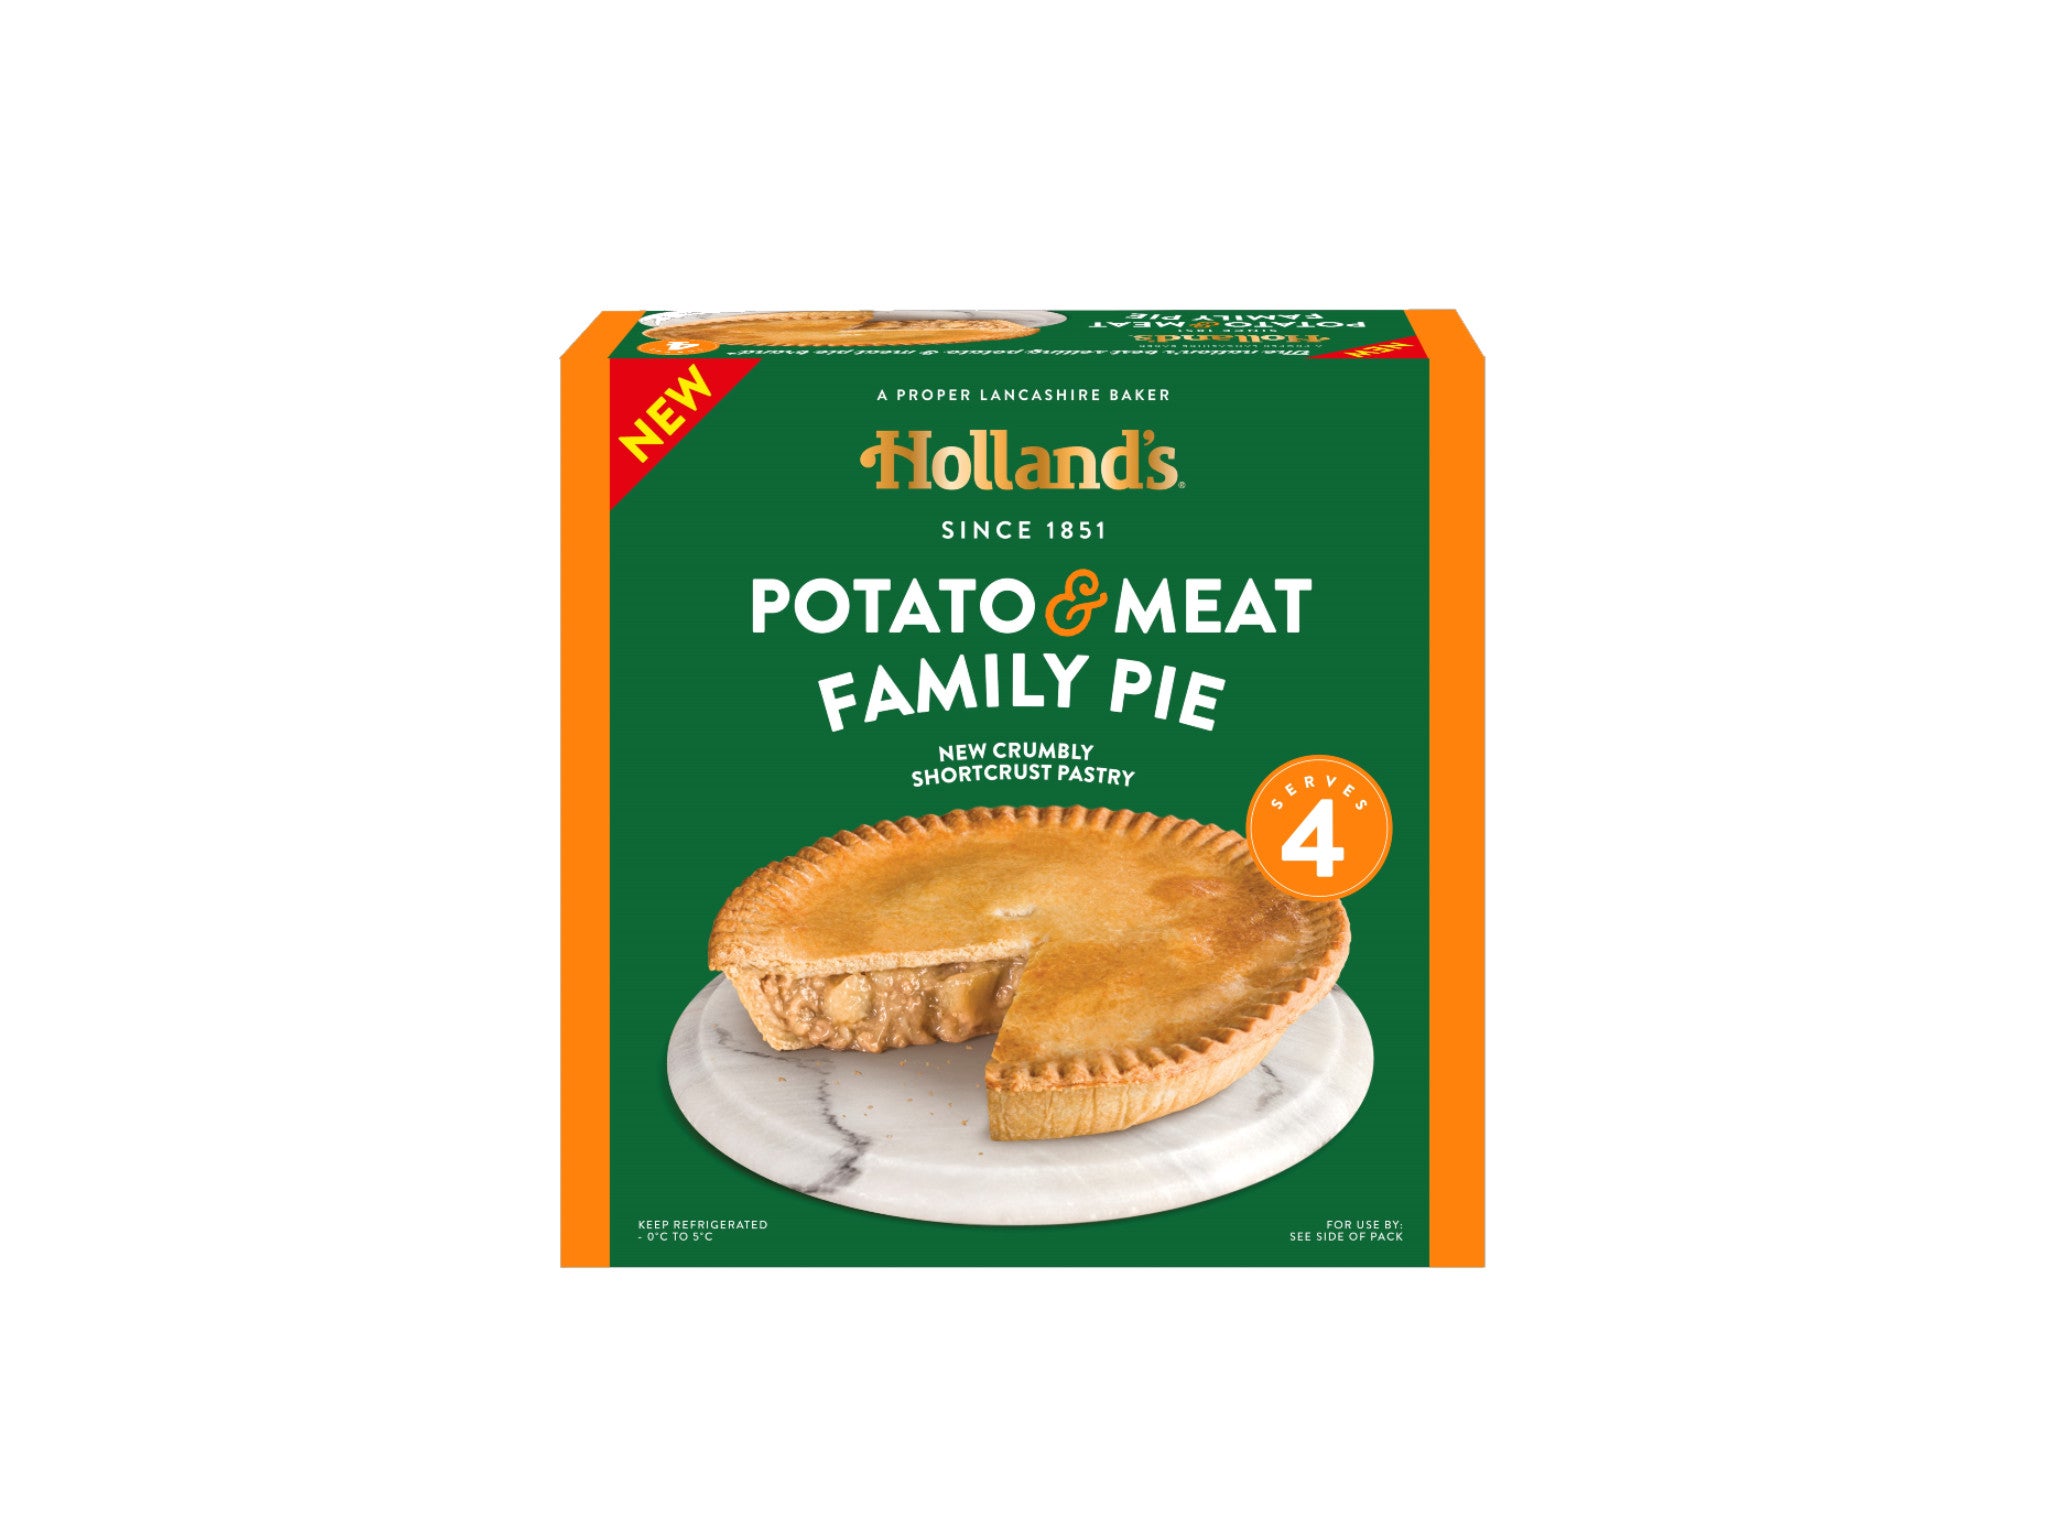 Holland’s potato and meat family pie